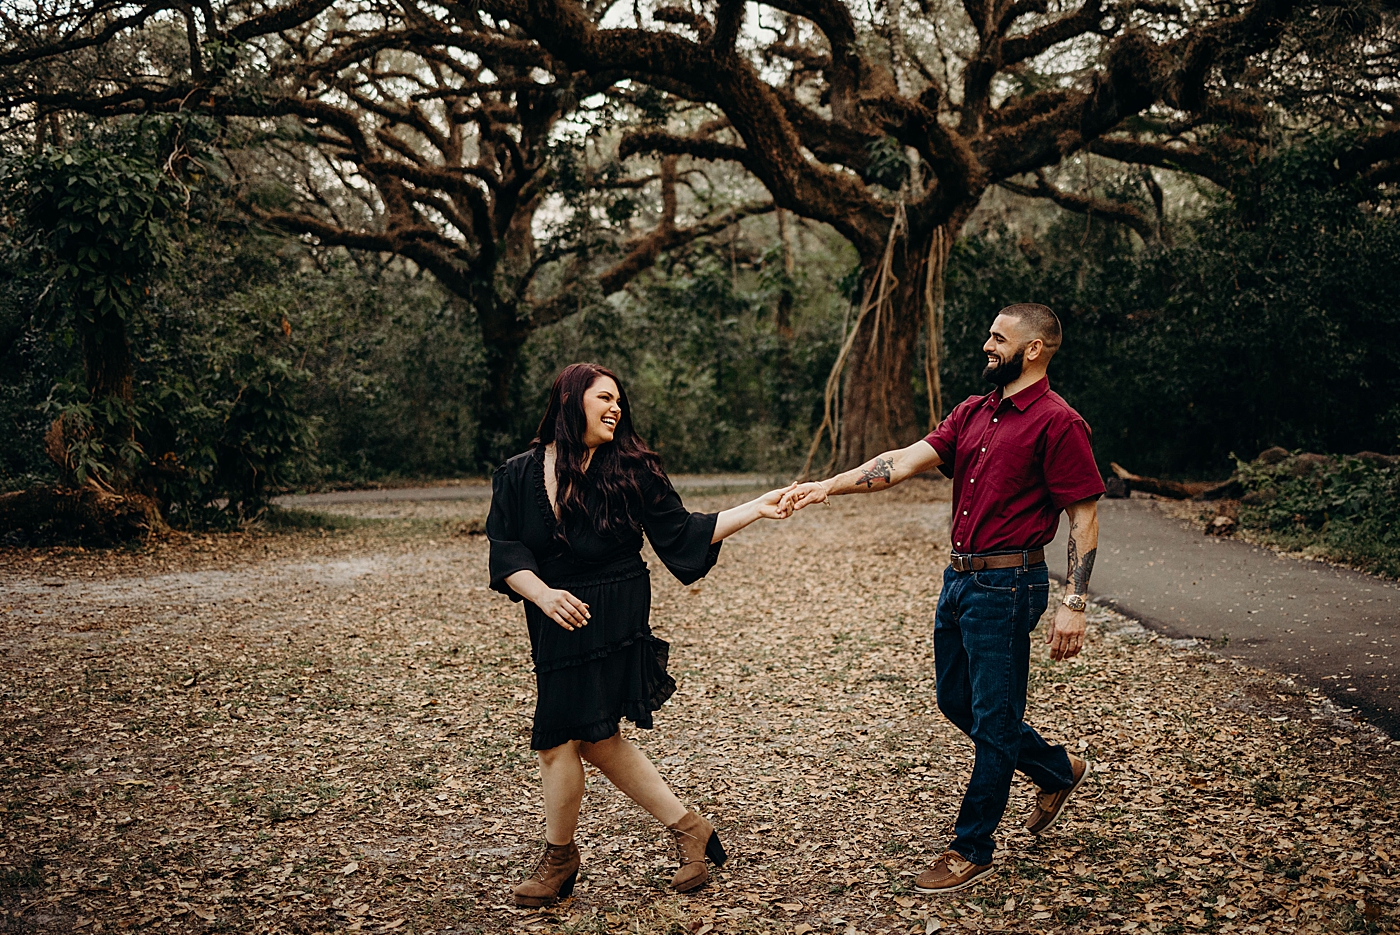 Woman leading man through fall forest Tree Top Park Engagement Photography captured by Maggie Alvarez Photography